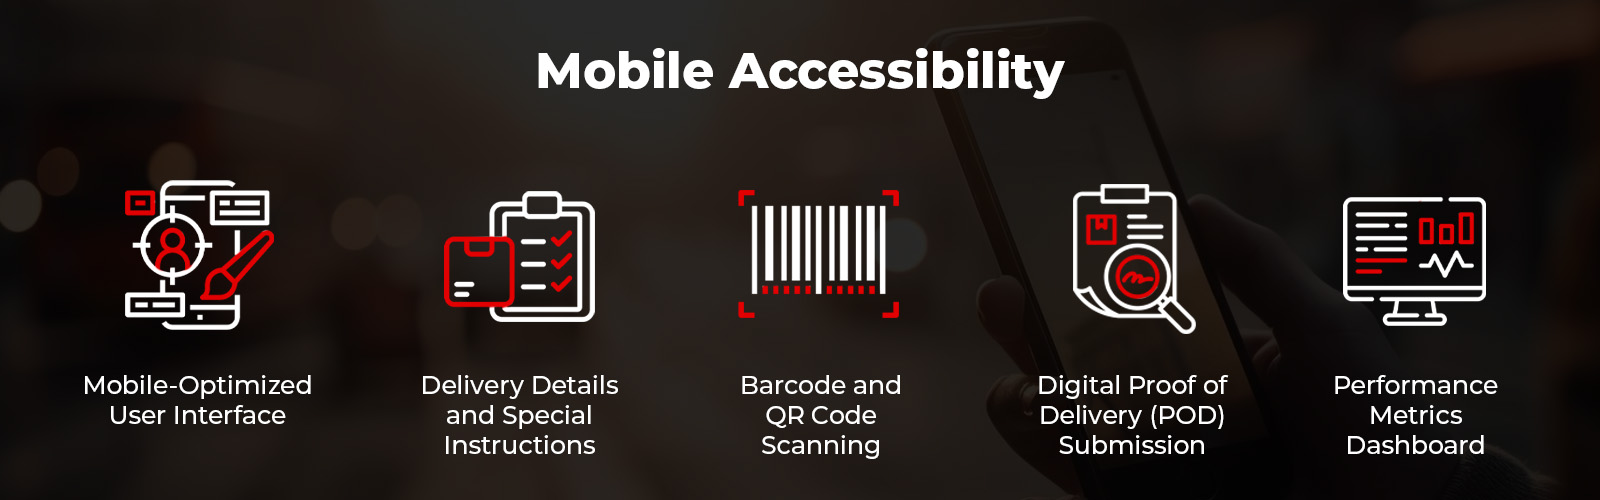 Need of mobile accessiblity in delivery tracking system